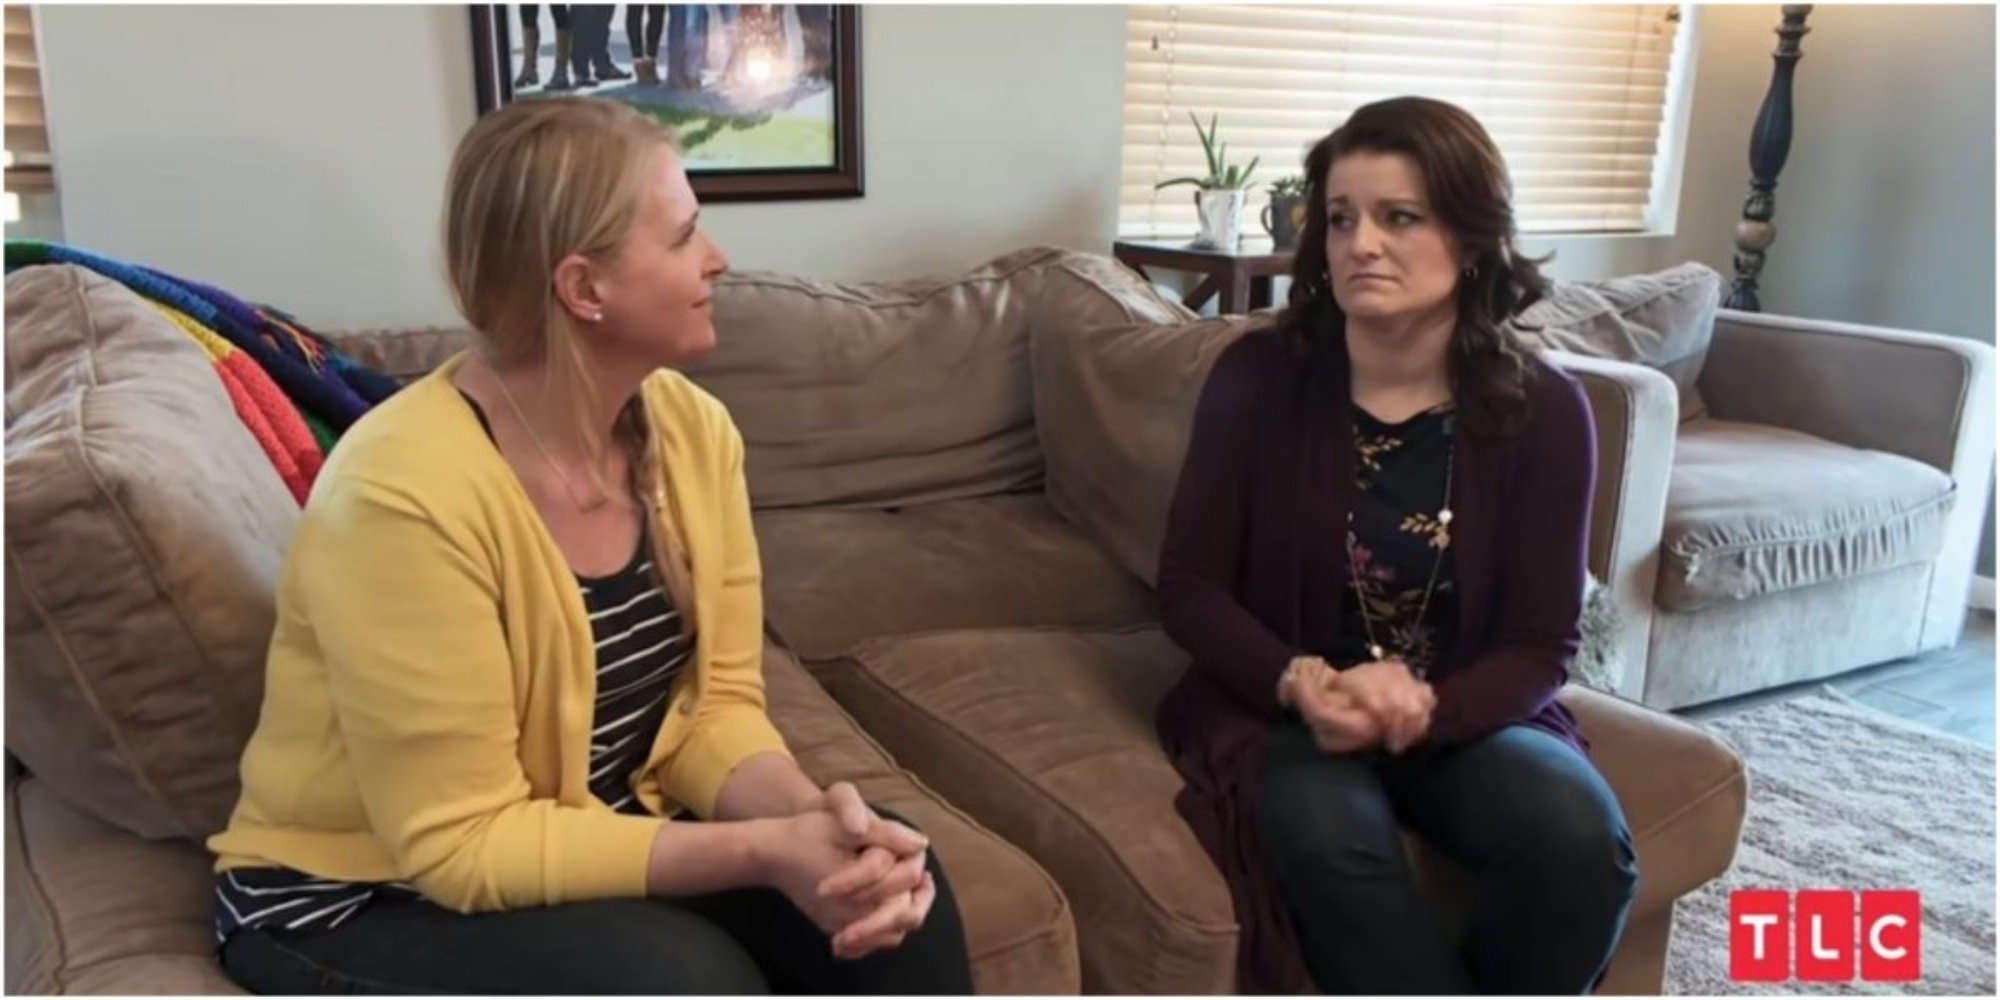 Christine and Robyn Brown sit down together during an episode of "Sister Wives."